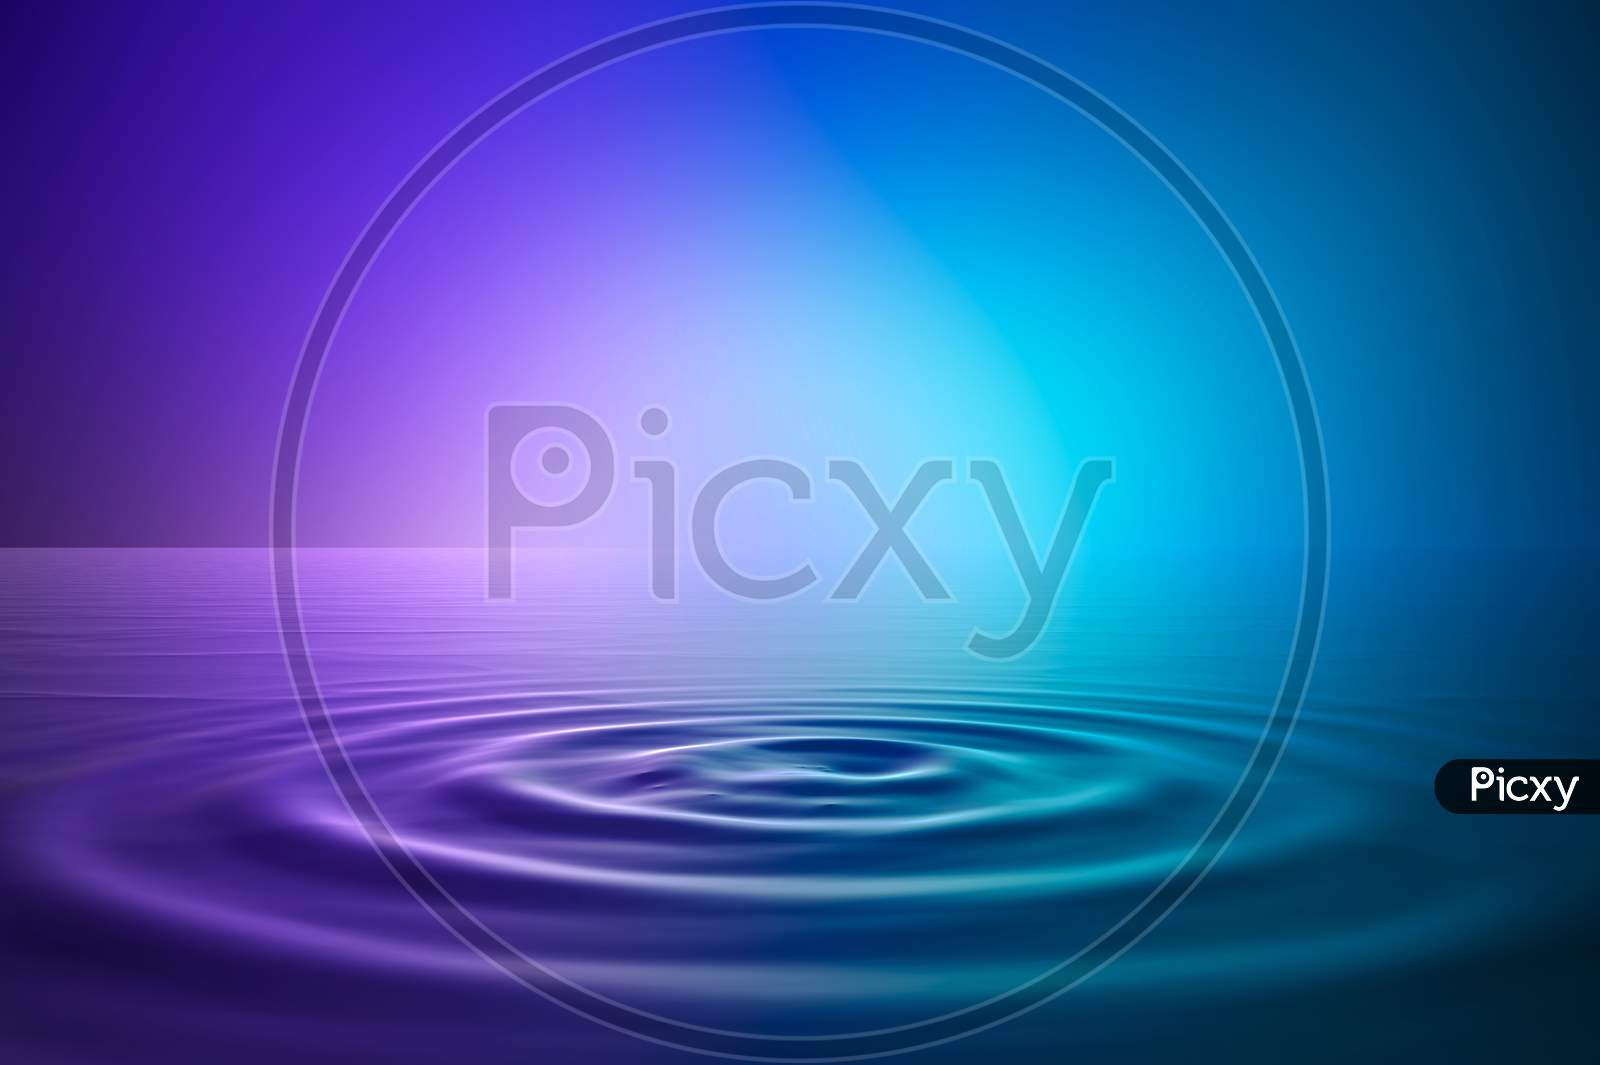 Spherical Water Drop Texture On Pink Blue Background